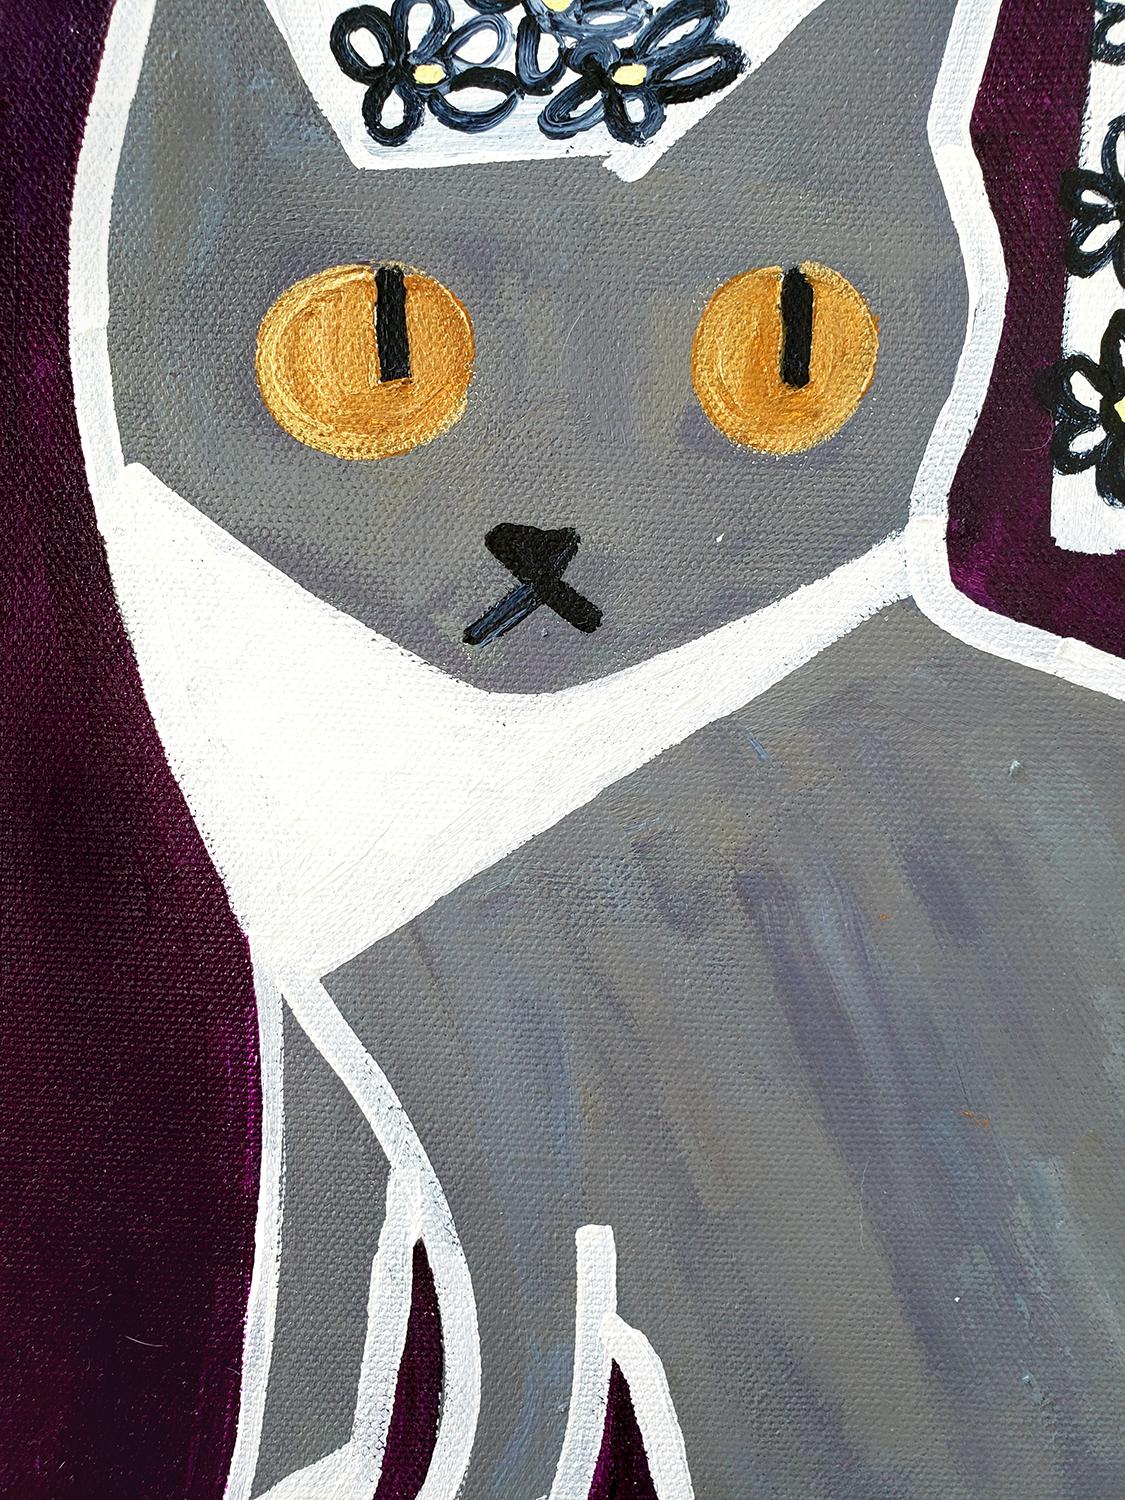 <p>Artist Comments<br>Artist Jessica JH Roller volunteers for a local cat rescue. Her duties include taking pictures of the cats to post on an adoption website. Jessica says the subject of this painting is a very lovely smokey gray cat with a fluffy